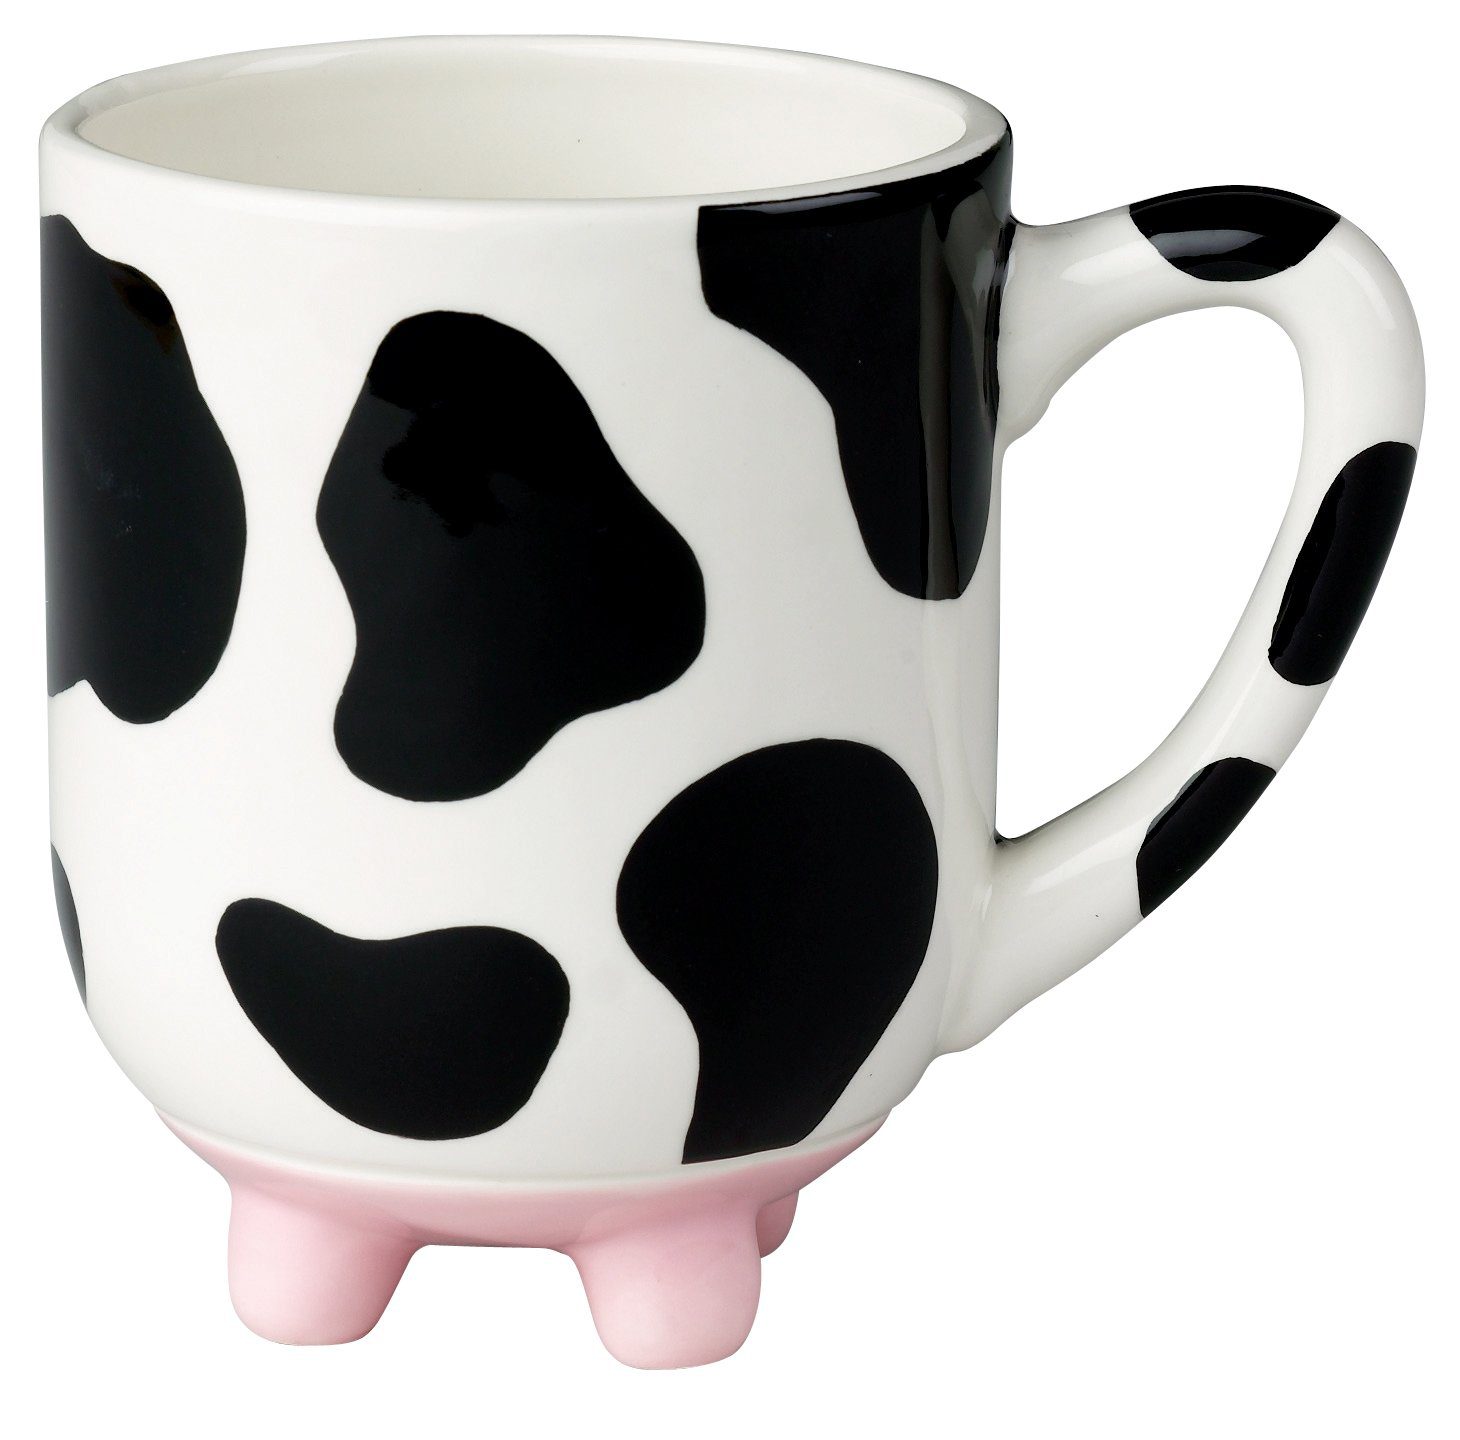 10 Hilarious Fun Gifts for Cow Lovers in 2022 | Gifthem